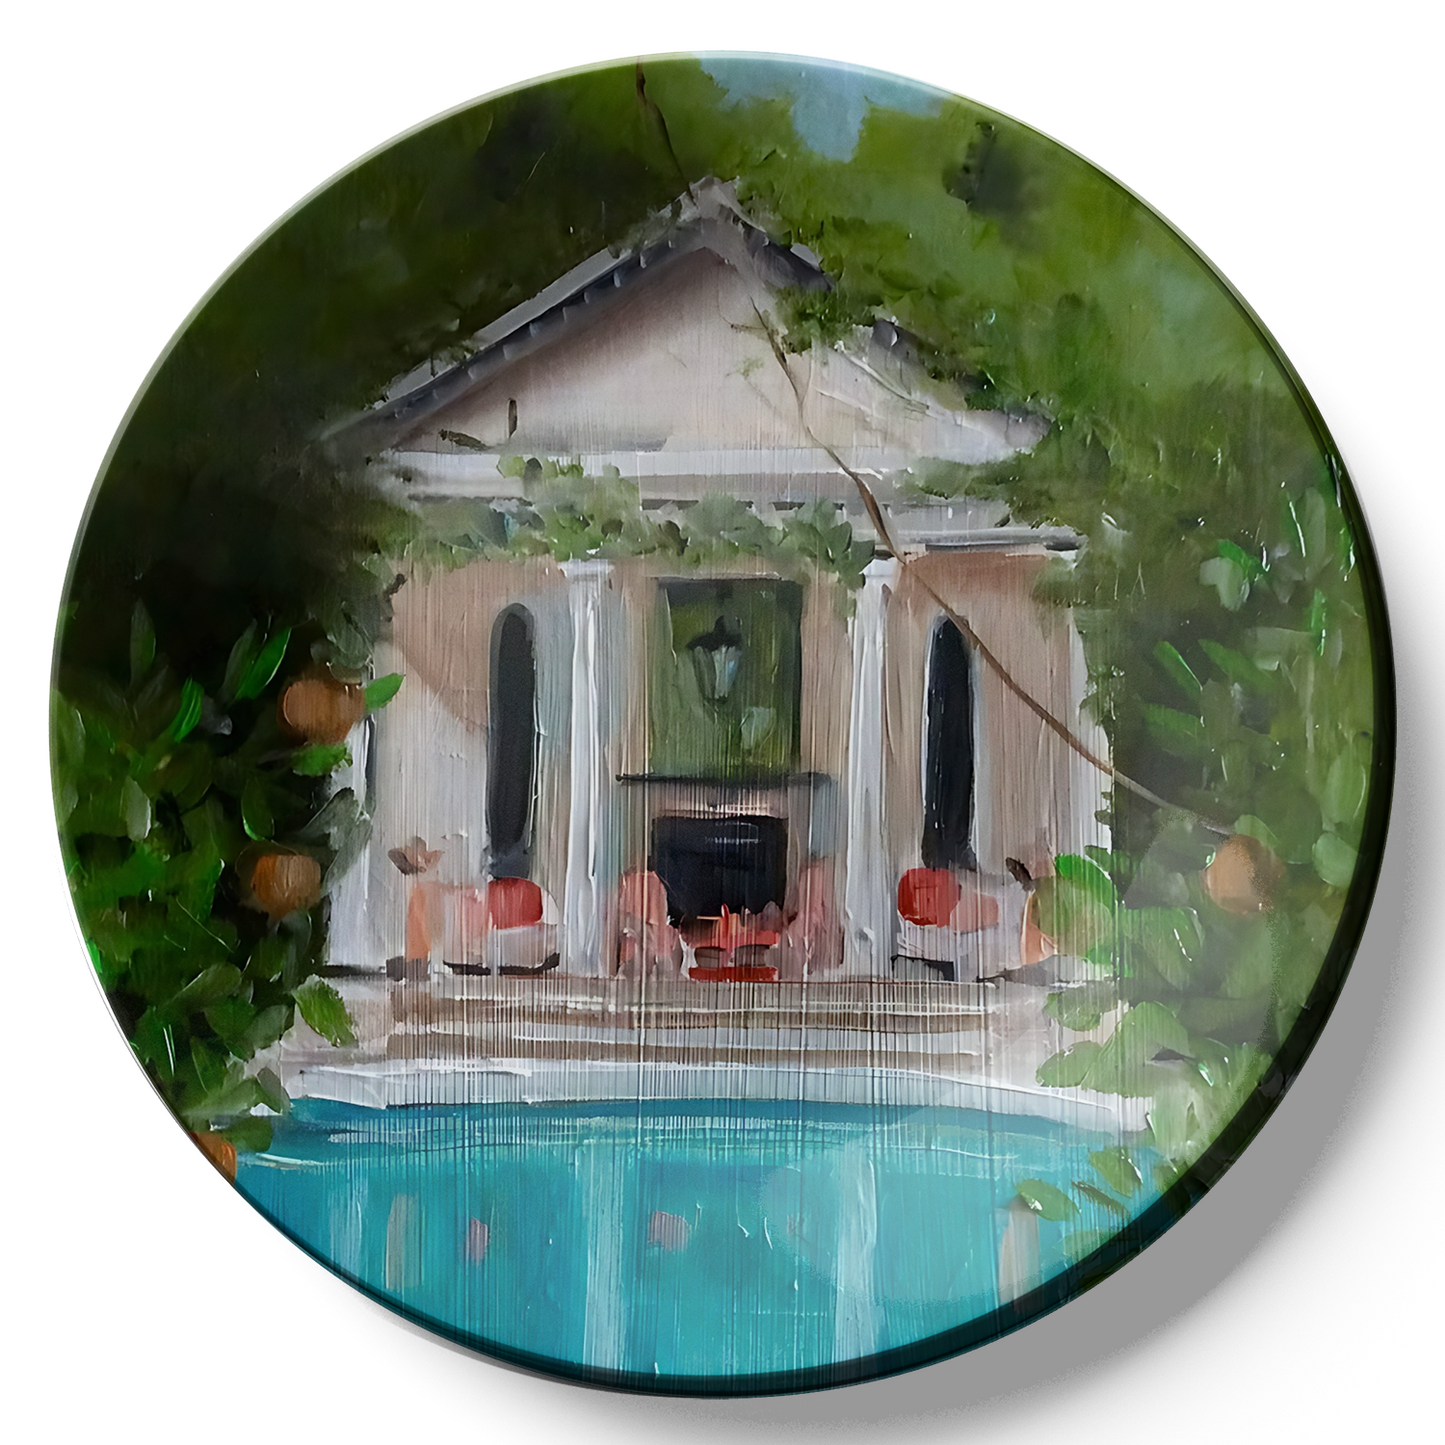 Poolside oasis home decoration ceramic wall hanging plates